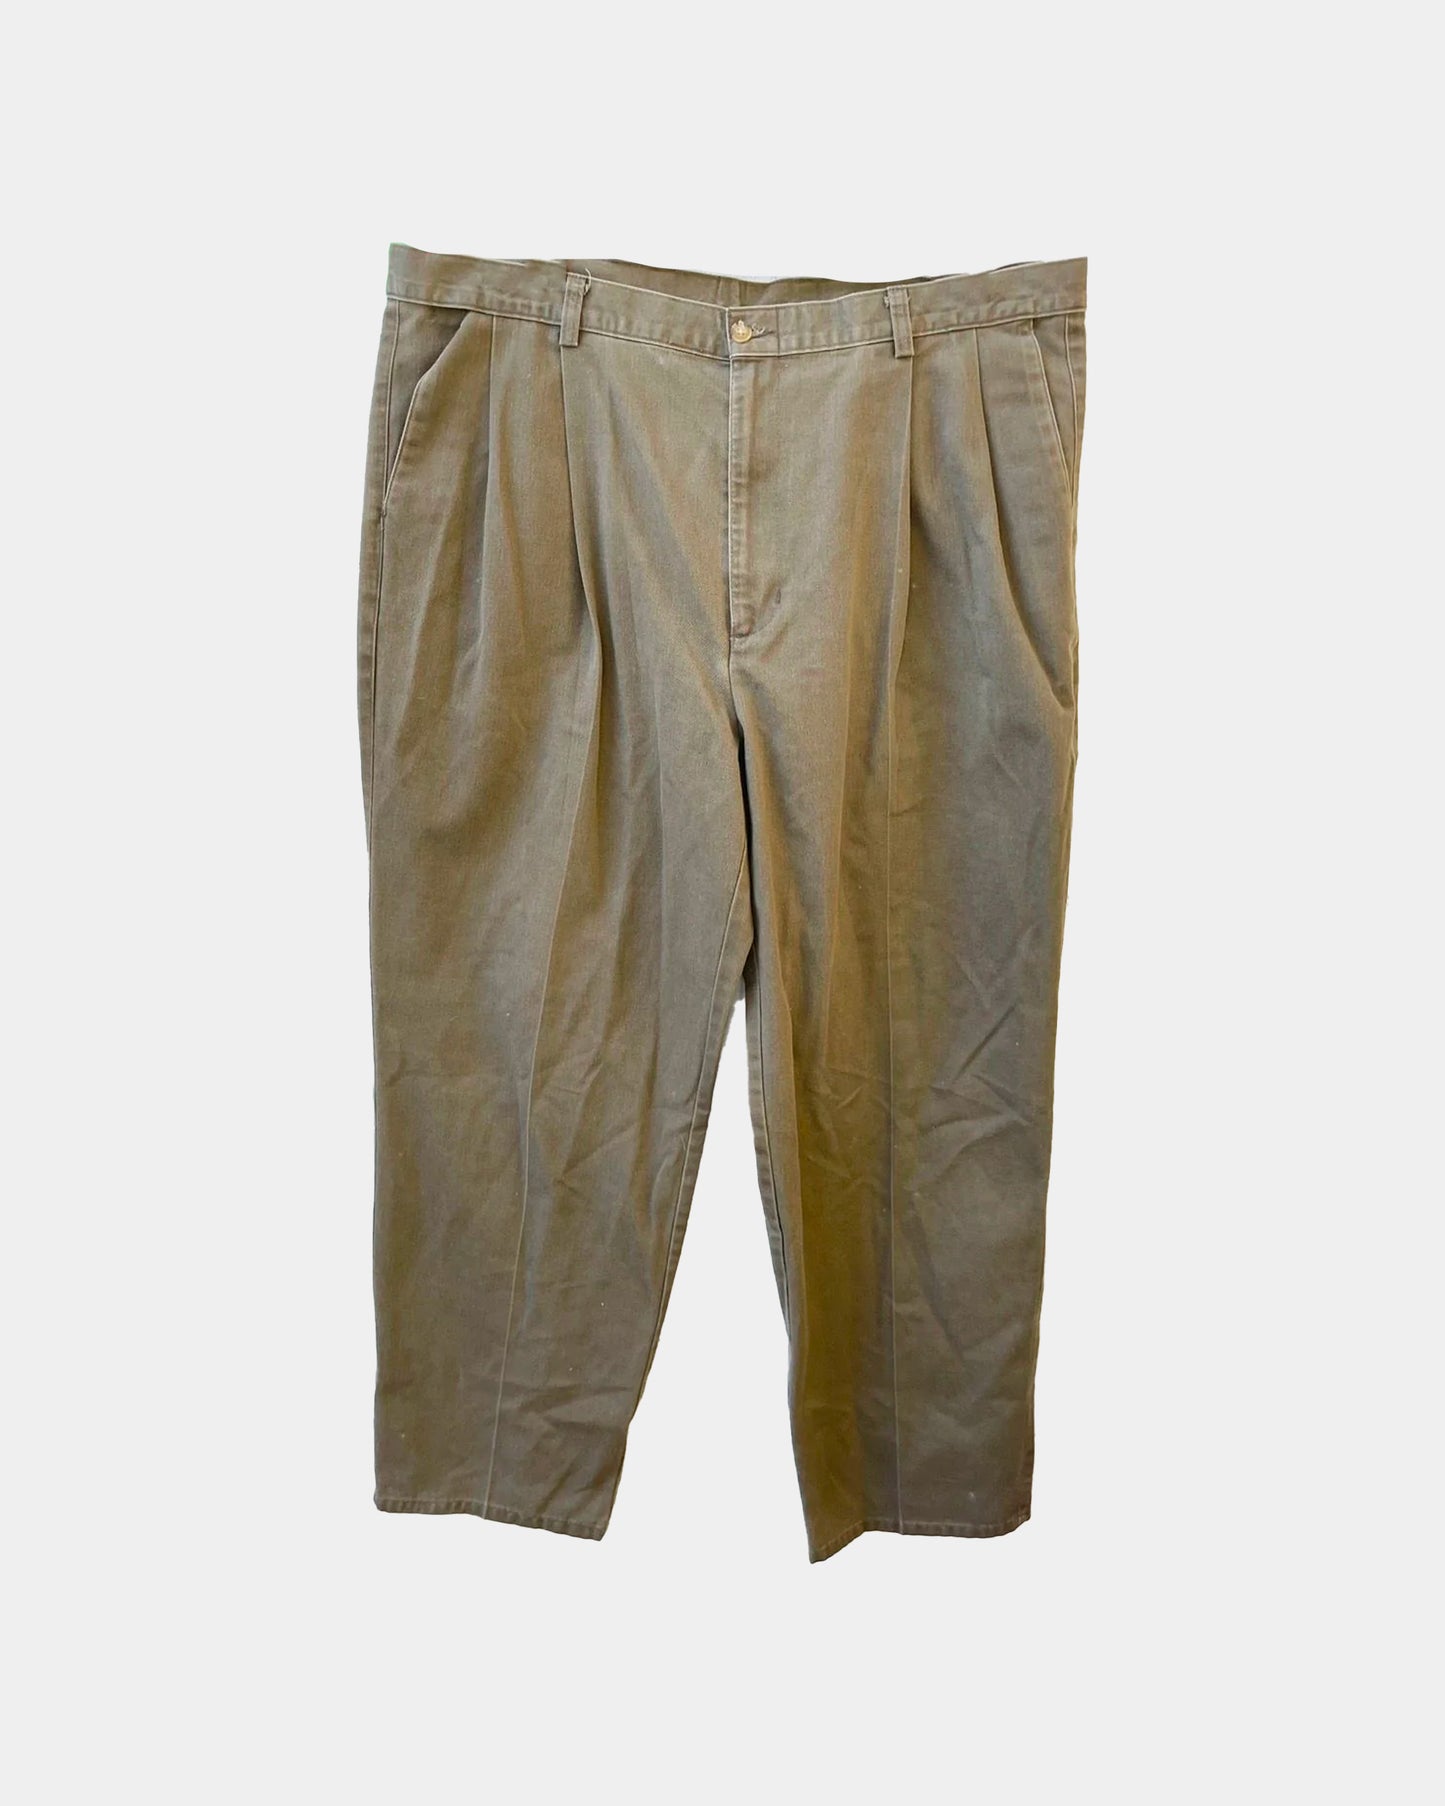 Vintage Pleated Baggy Skater Chino Pants Olive Green